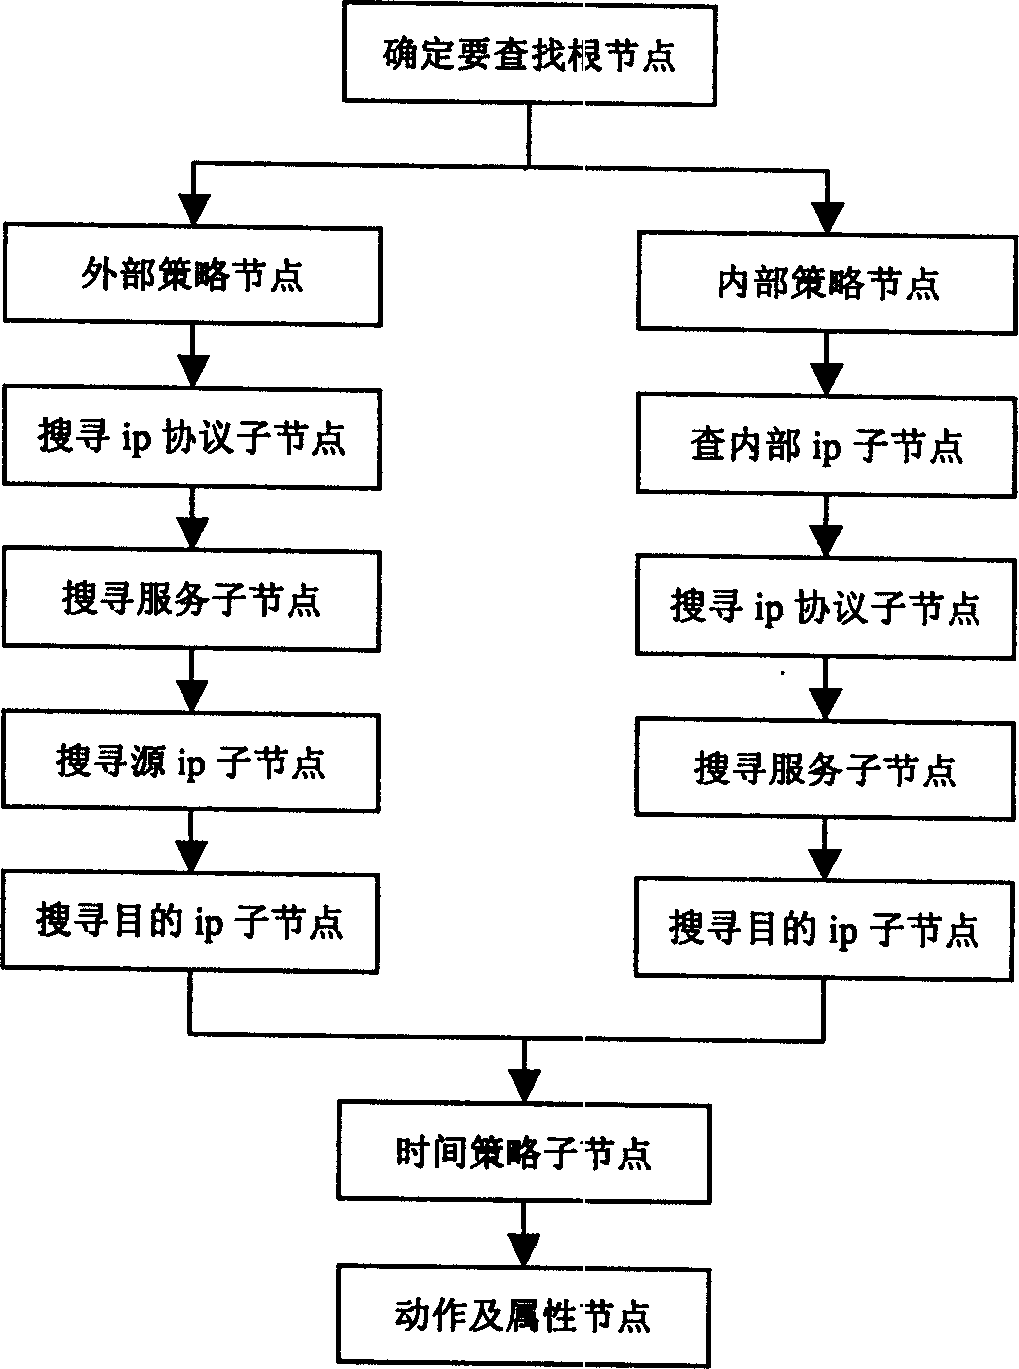 Policy tree based packet filtering and management method